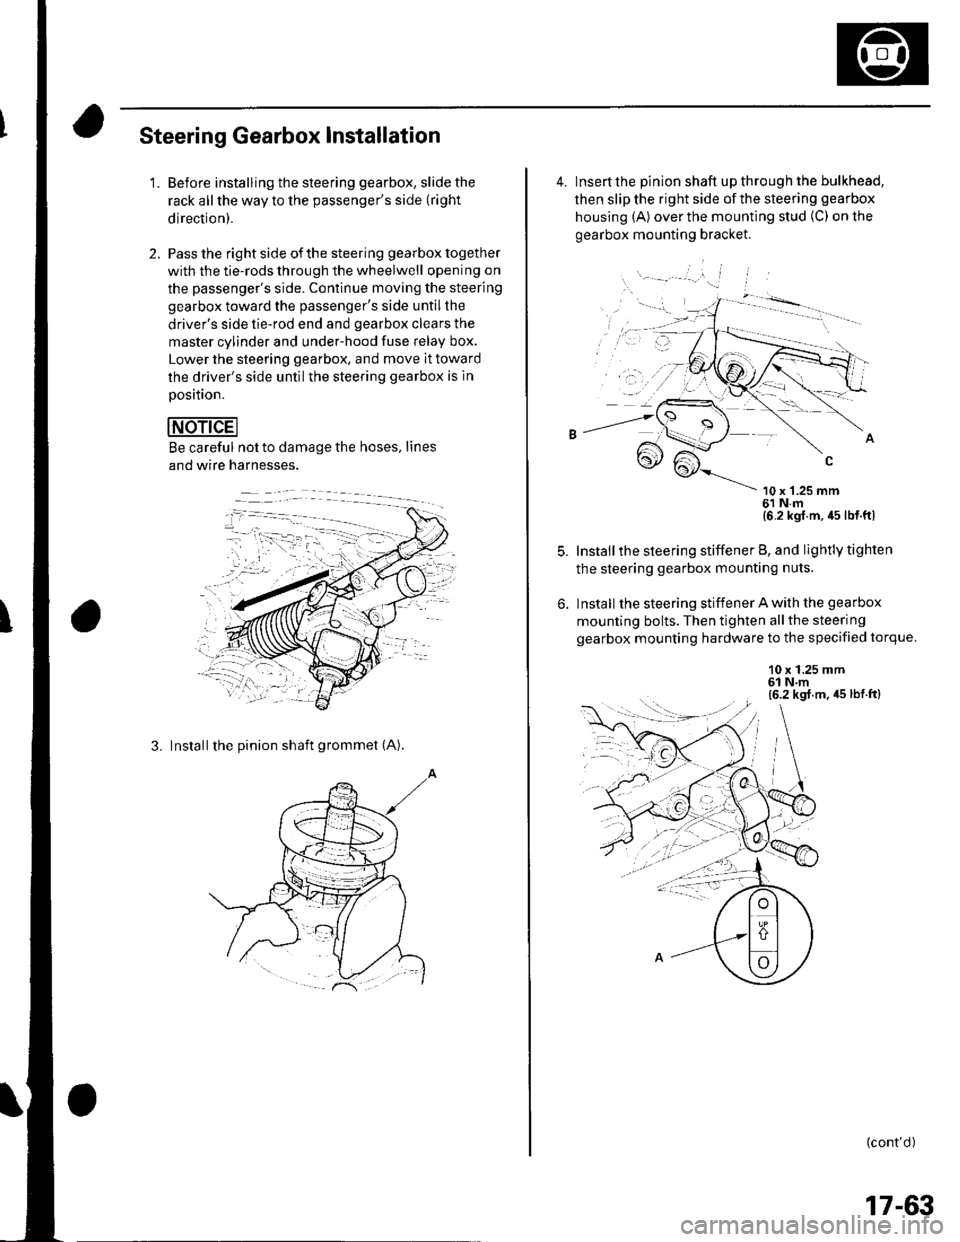 HONDA CIVIC 2002 7.G Workshop Manual Steering Gearbox Installation
2.
1.Before installing the steering gearbox, slide the
rack all the way to the passengers side (right
direction).
Pass the right side of the steering gearbox together
w